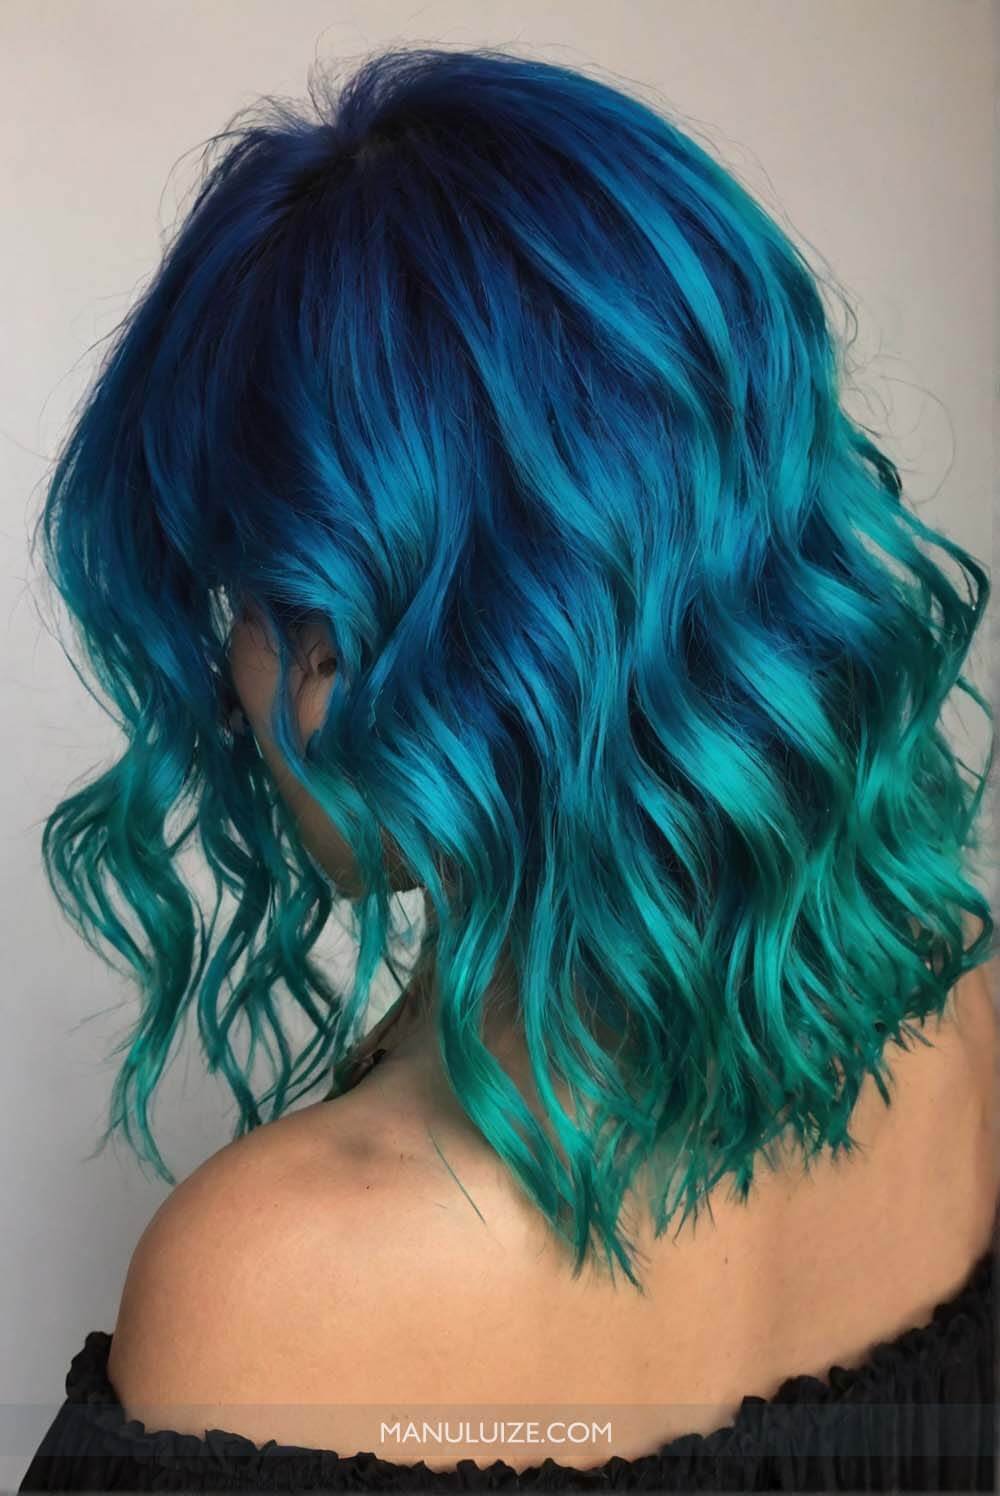 Blue and green hair